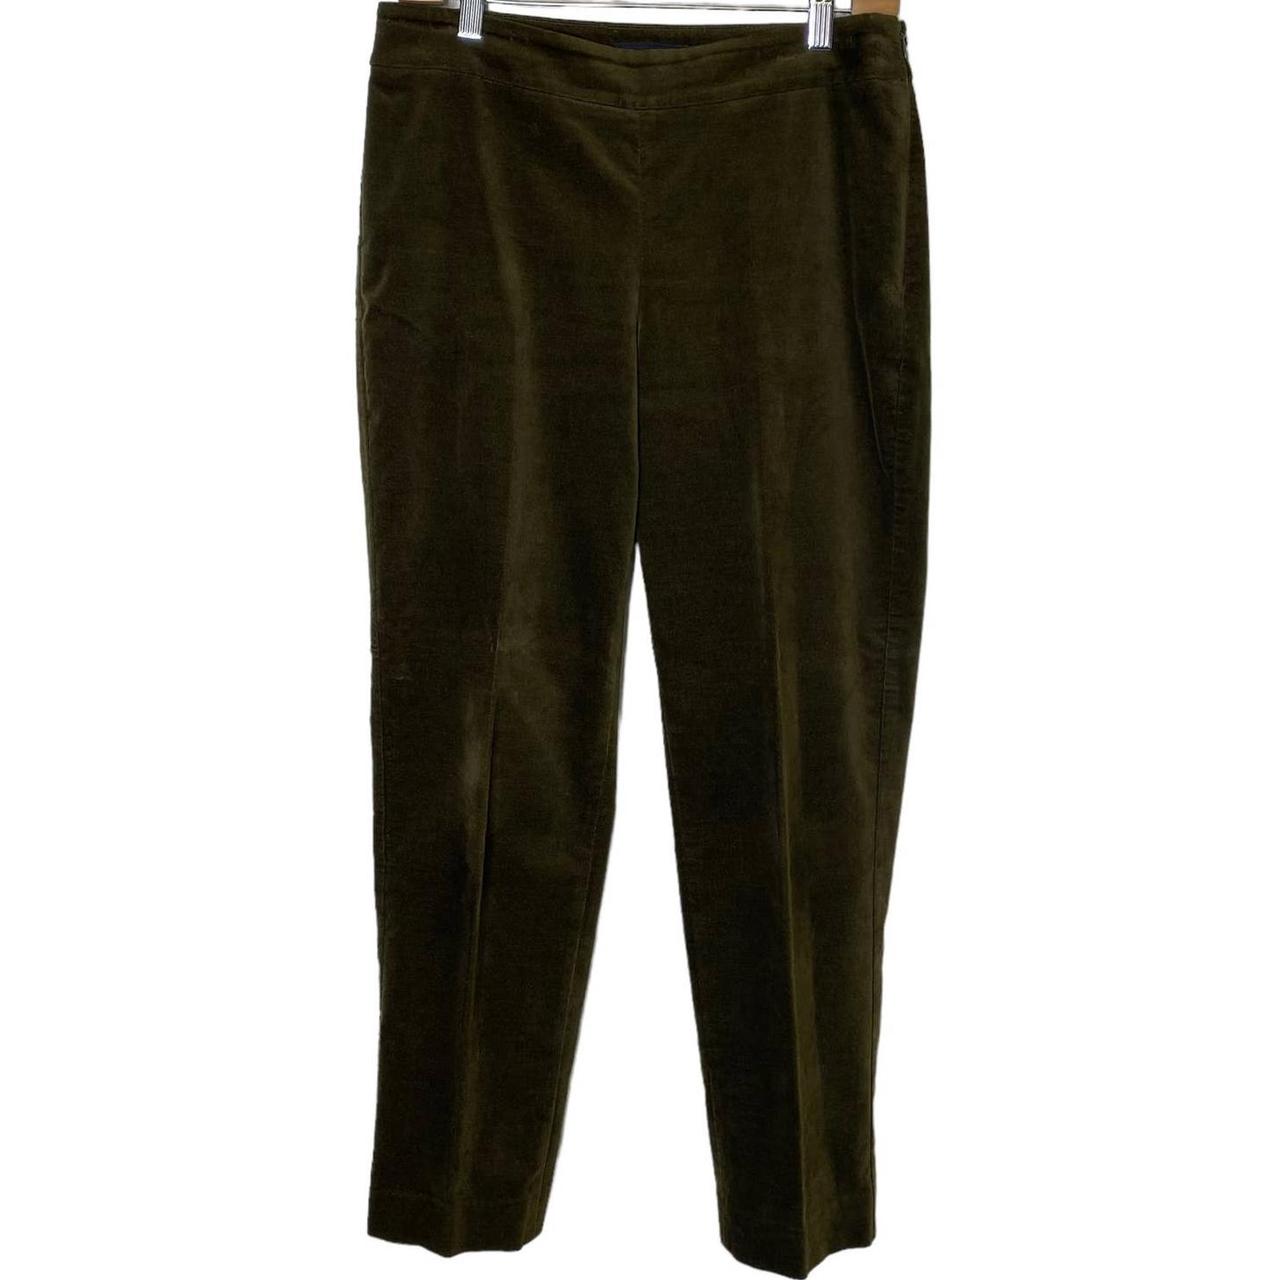 Forest Green Dress Pants - Green High Waisted Pants - Trousers - Lulus